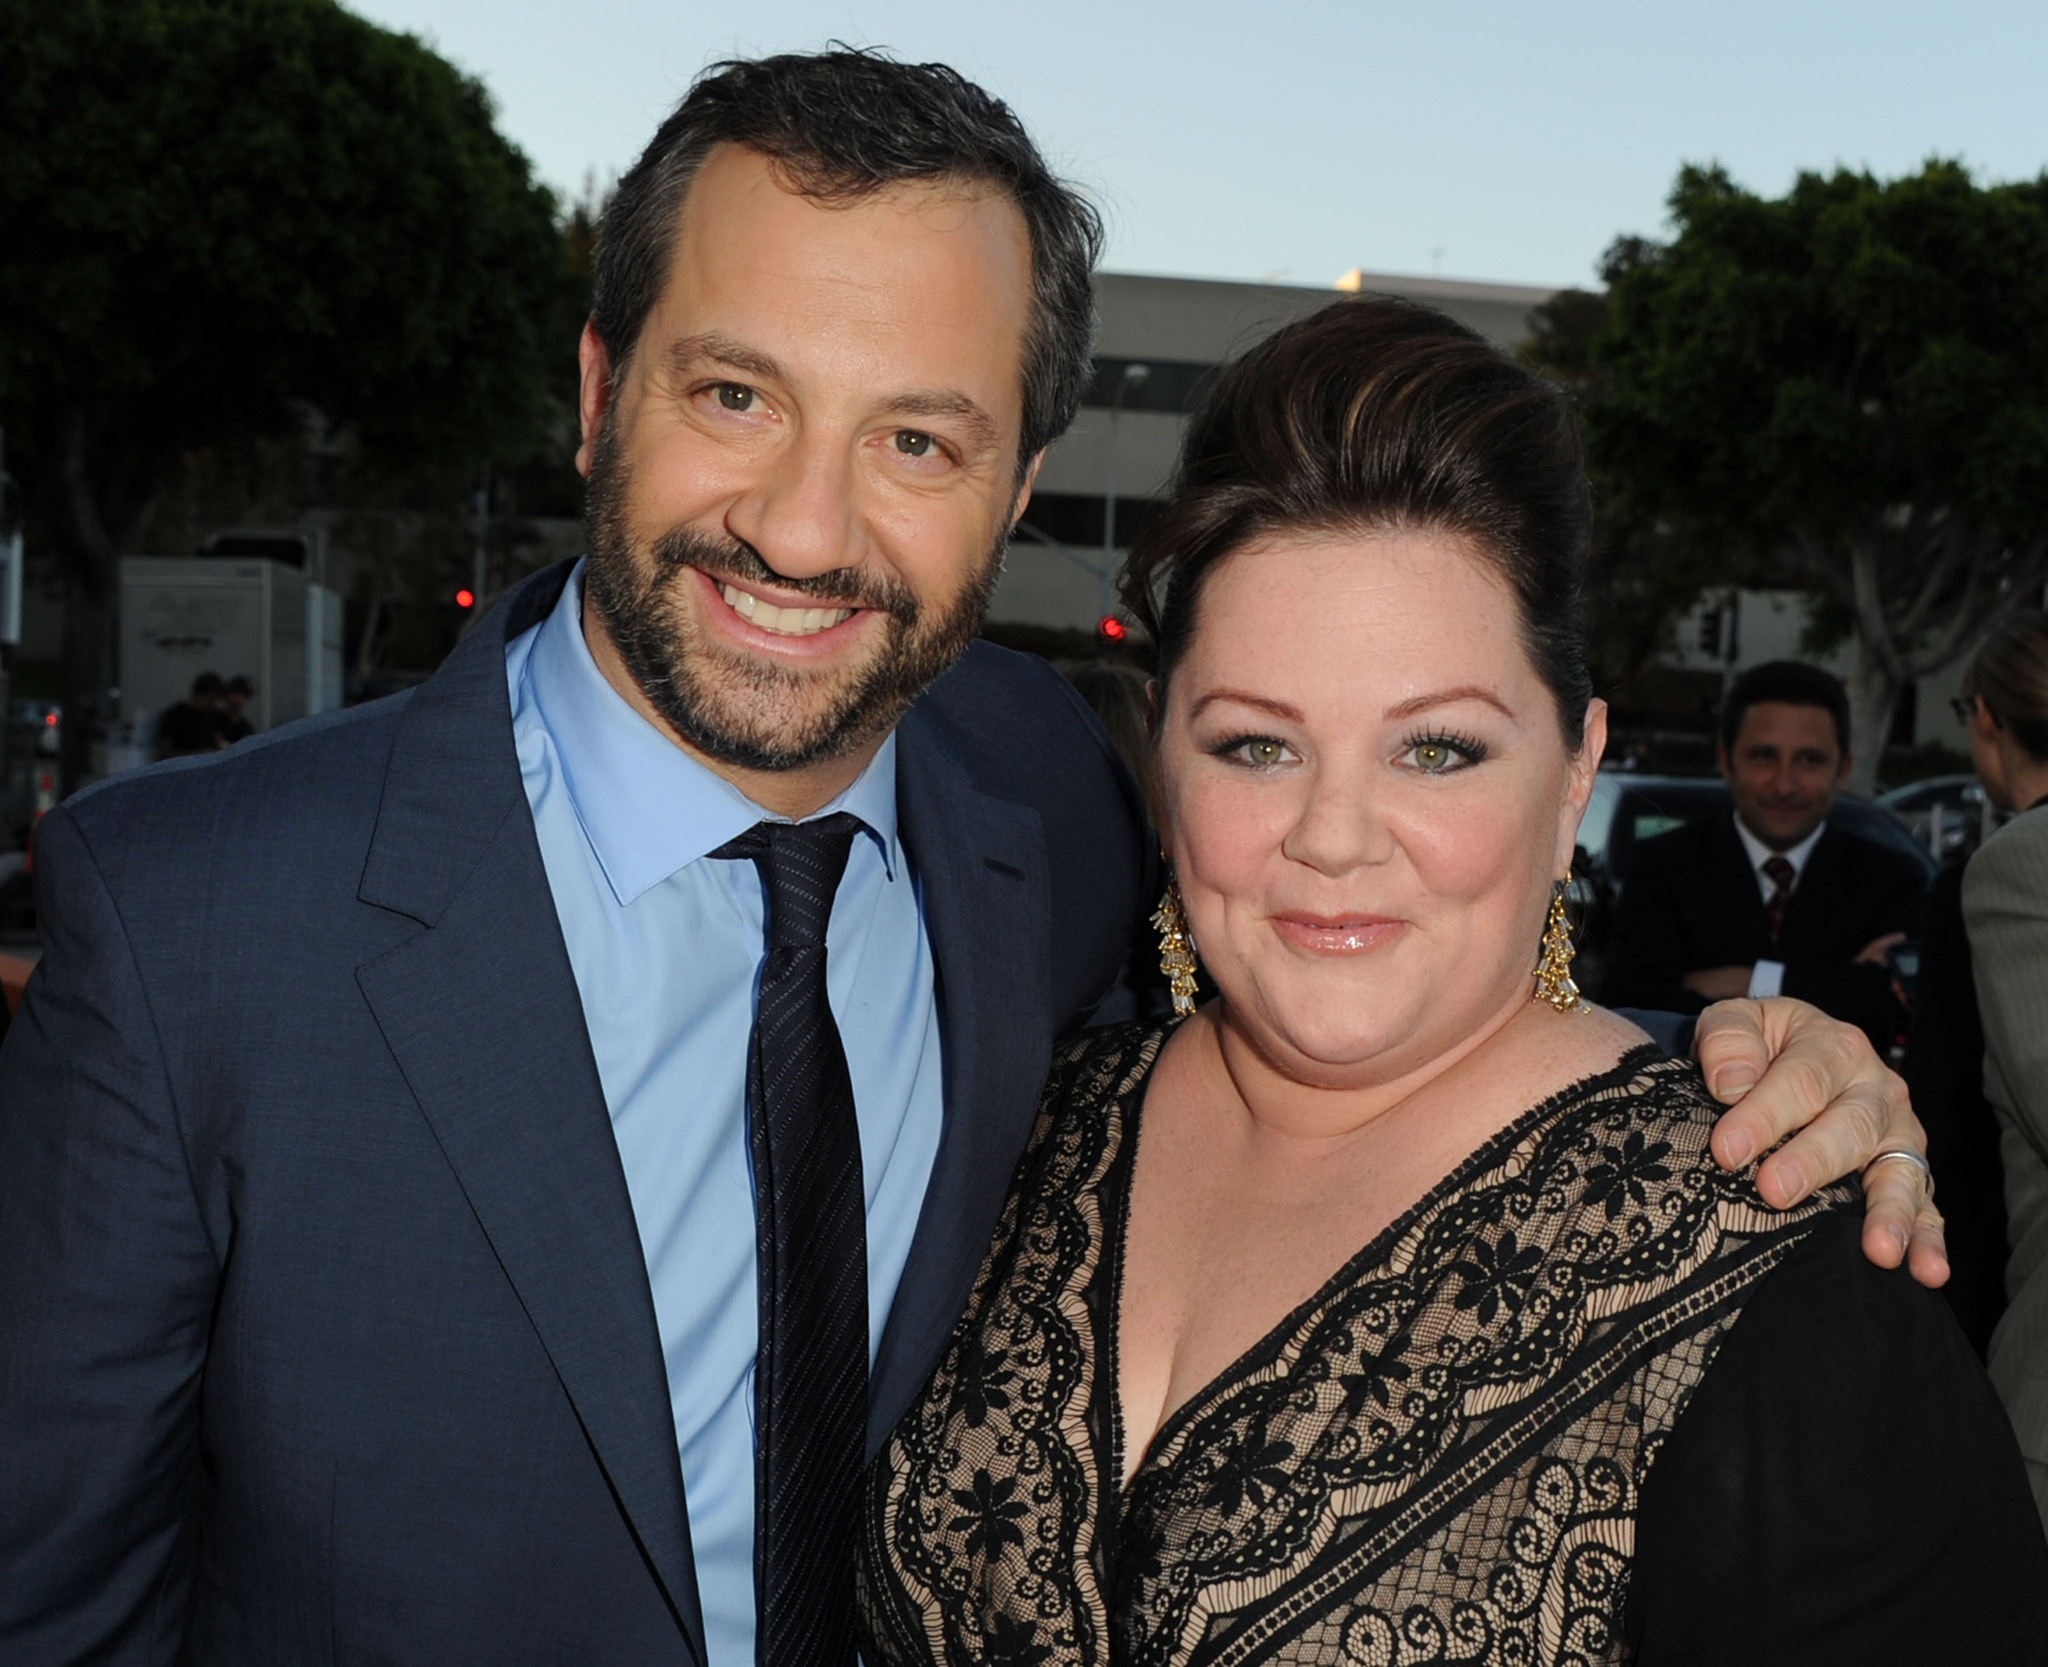 Judd Apatow and Melissa McCarthy at event of Sunokusios pamerges (2011)